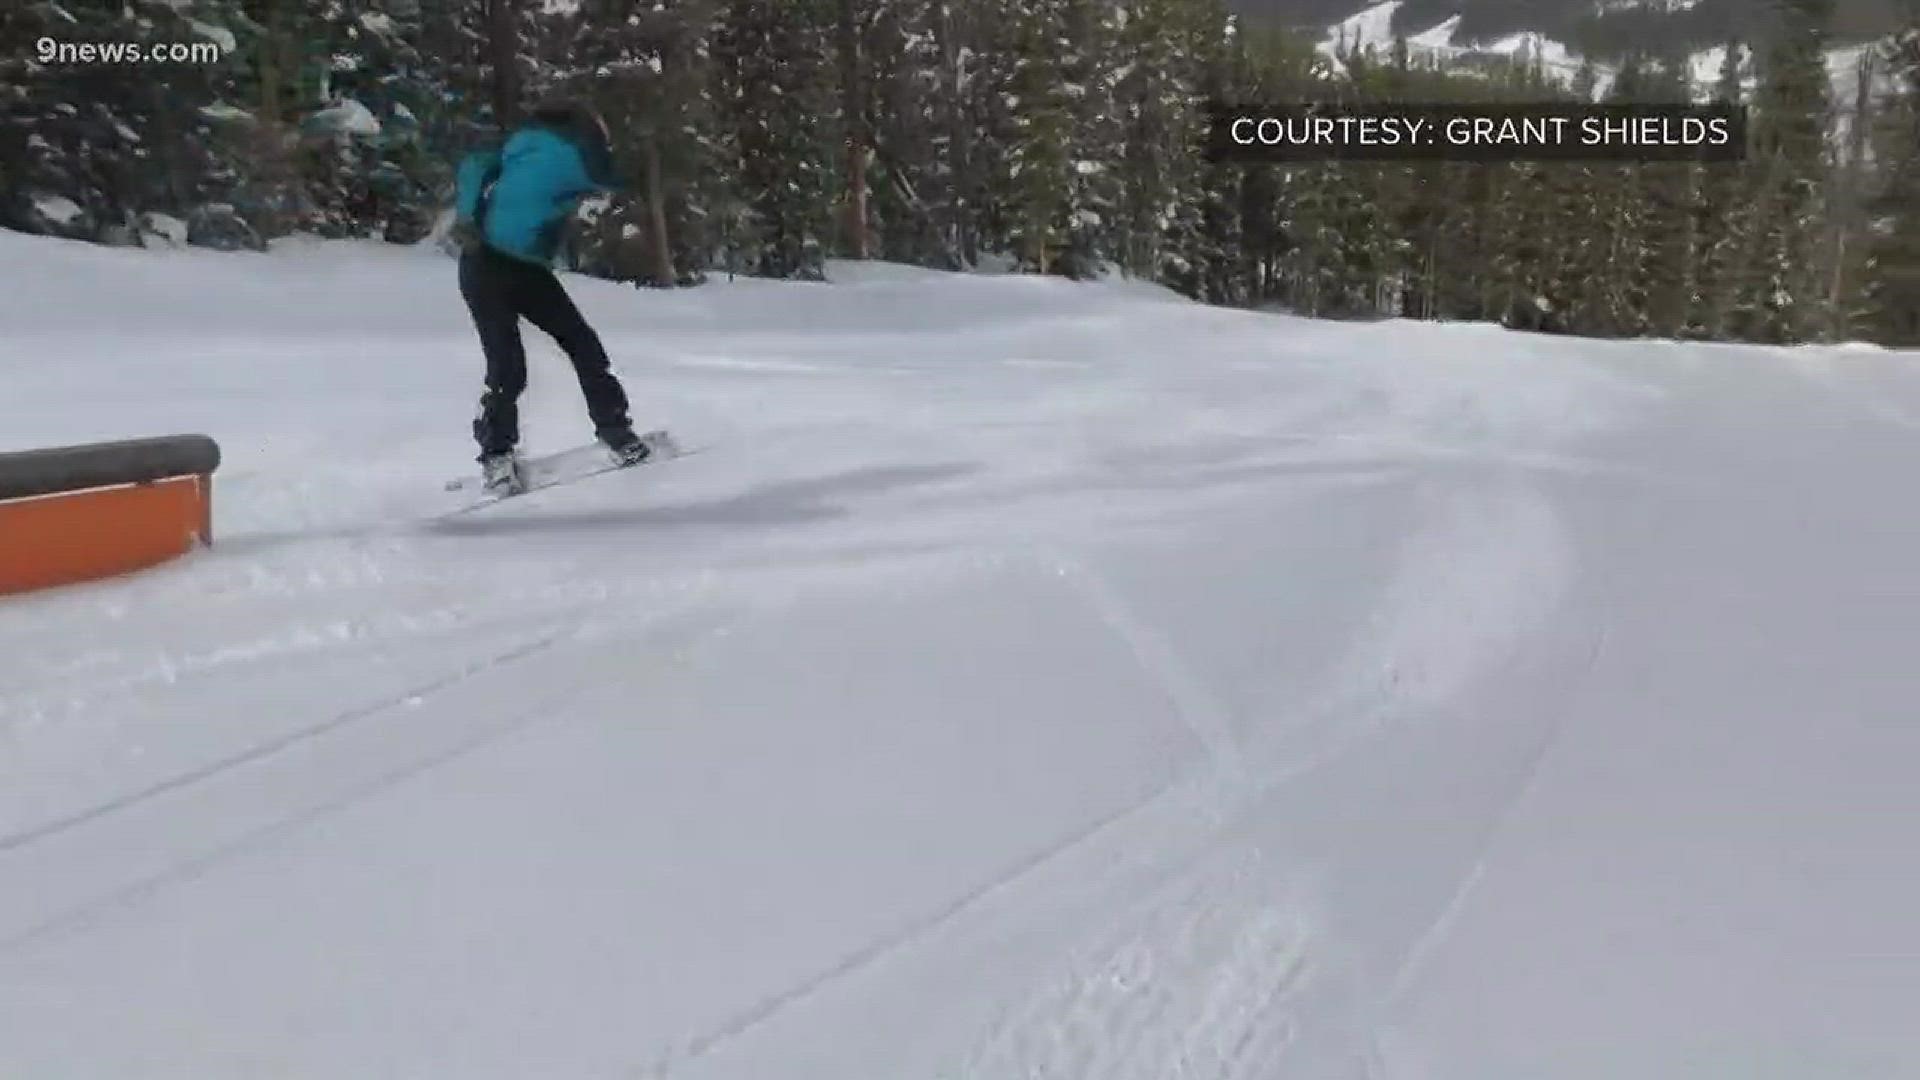 The three teenagers from North Carolina couldn’t have come to Colorado at a better time. Epic snow totals made for the best snowboarding conditions they’ve ever seen and on their final day, that snow took them for a frightening and unforgettable ride.